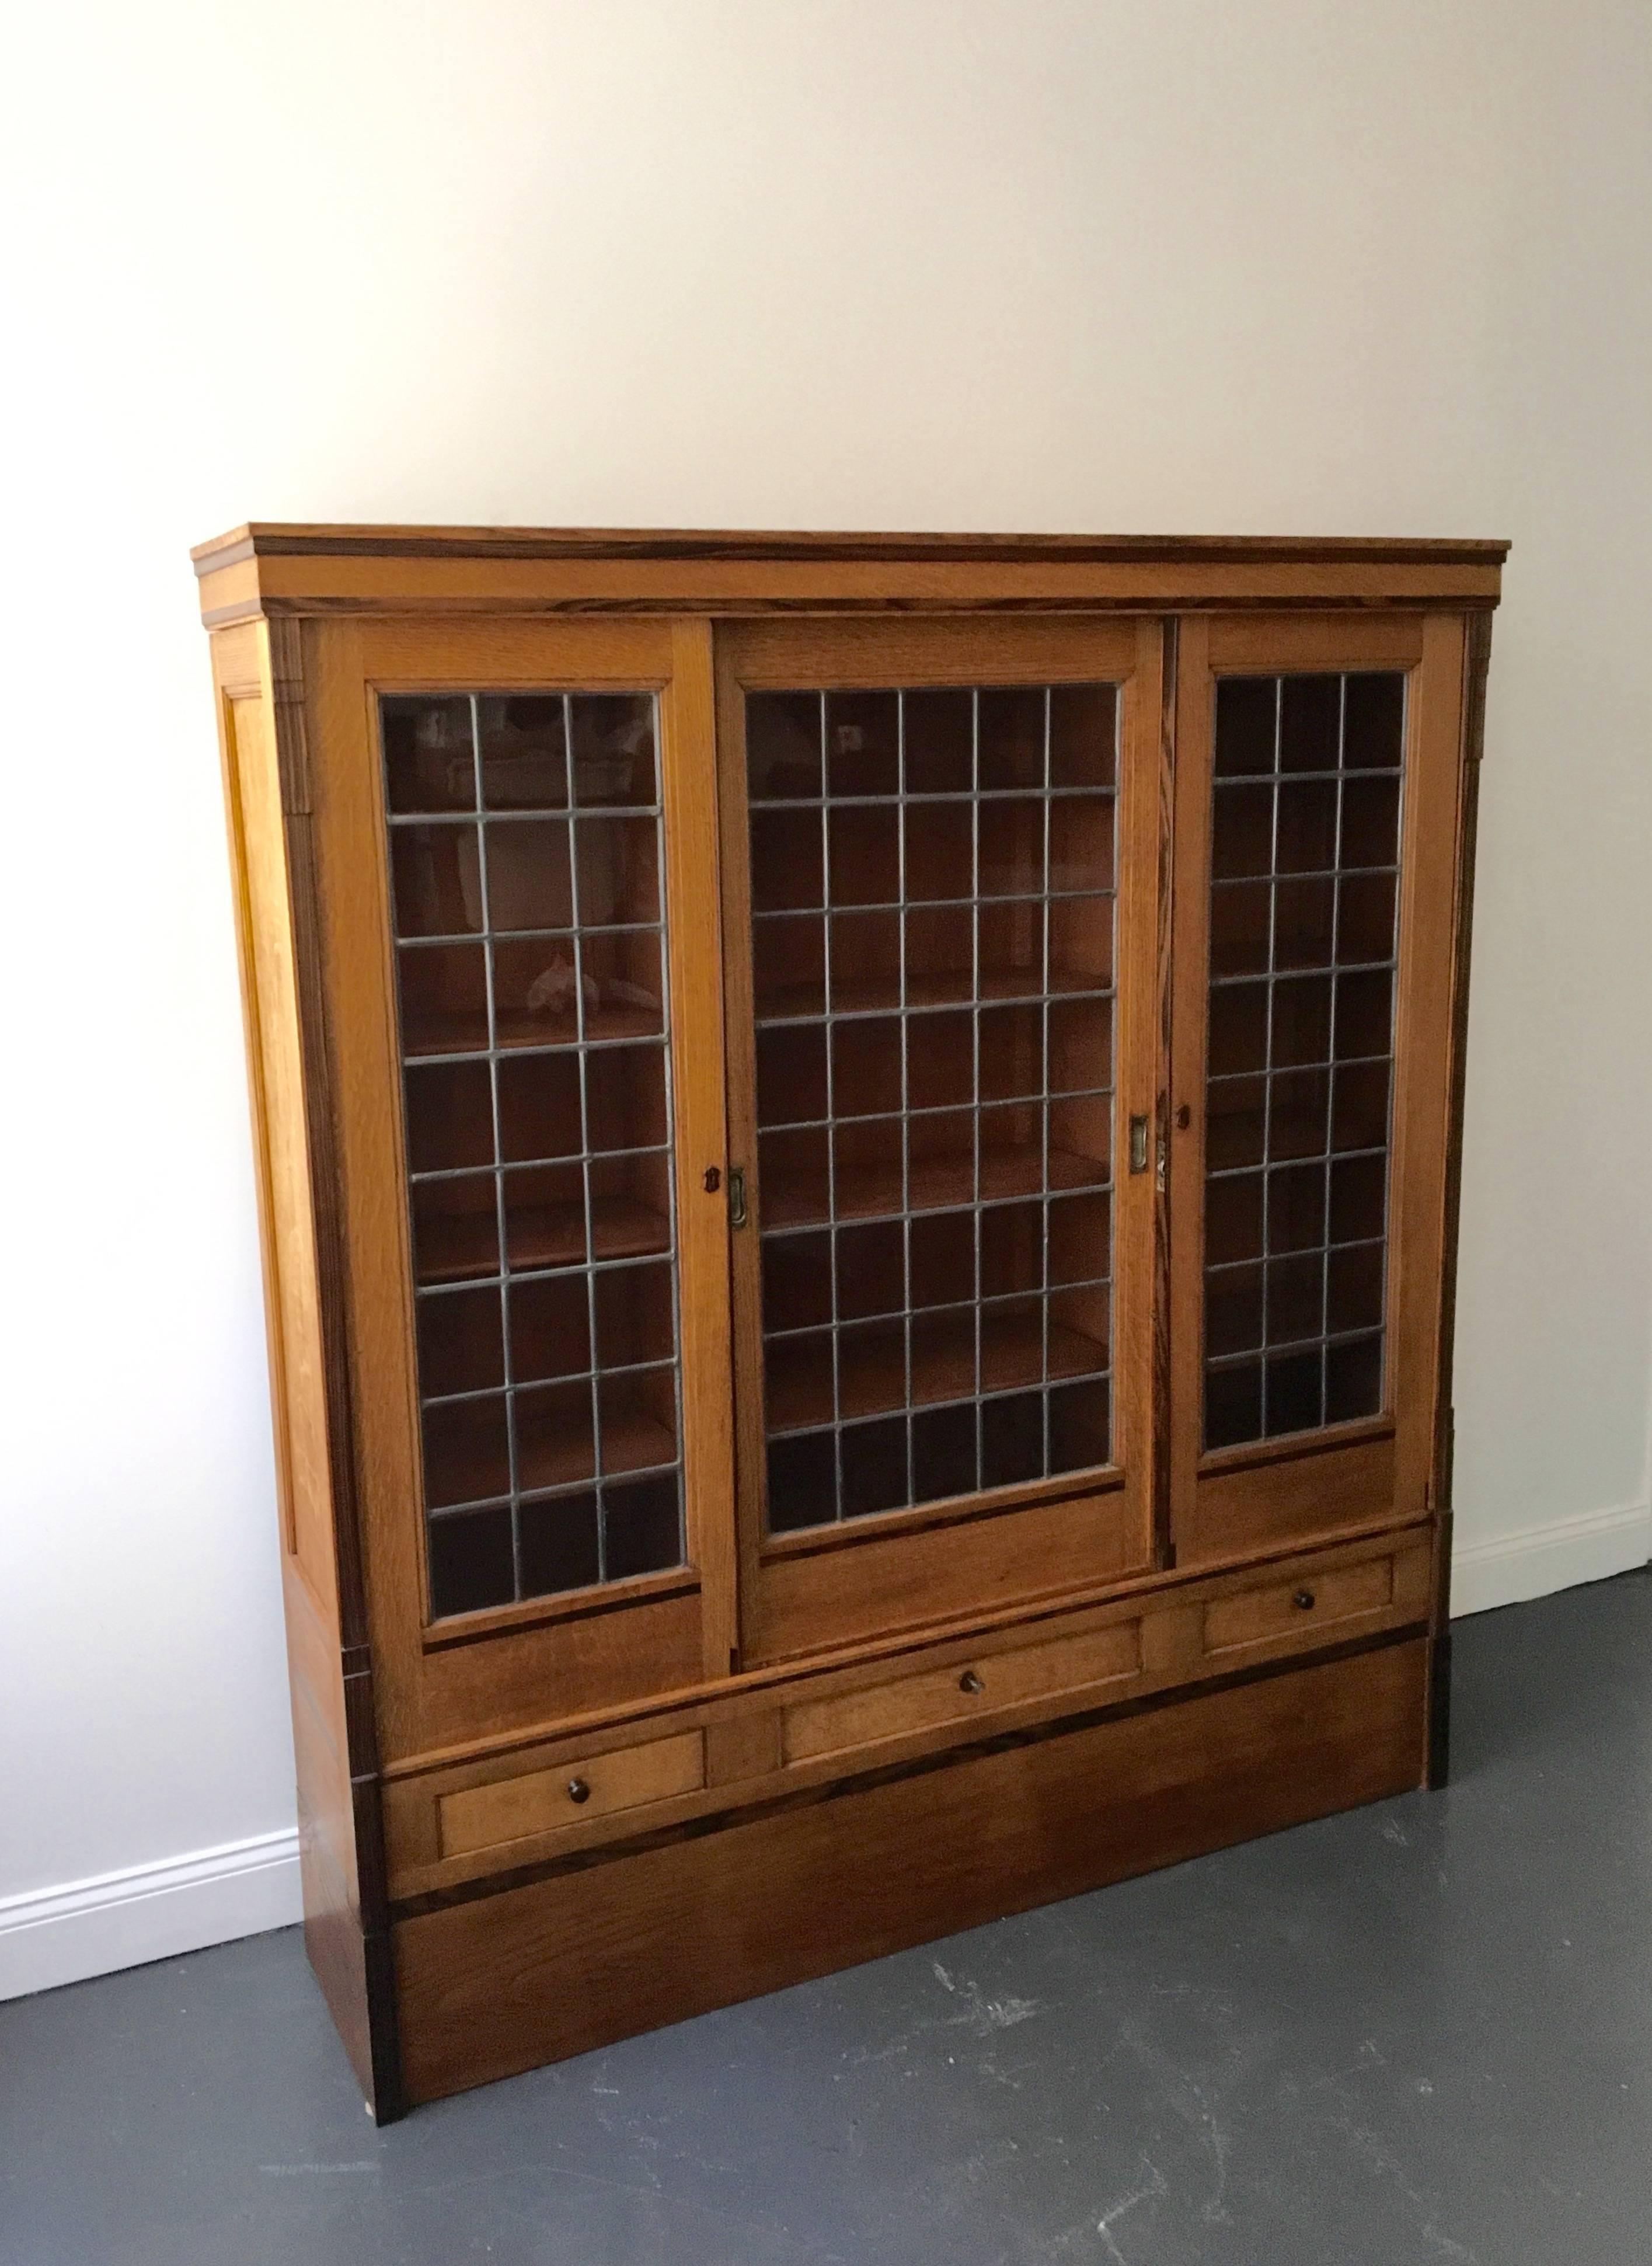 A circa 1930s cabinet in oak, Macassar and glass. Three sliding doors with internal shelves and three lower drawers.